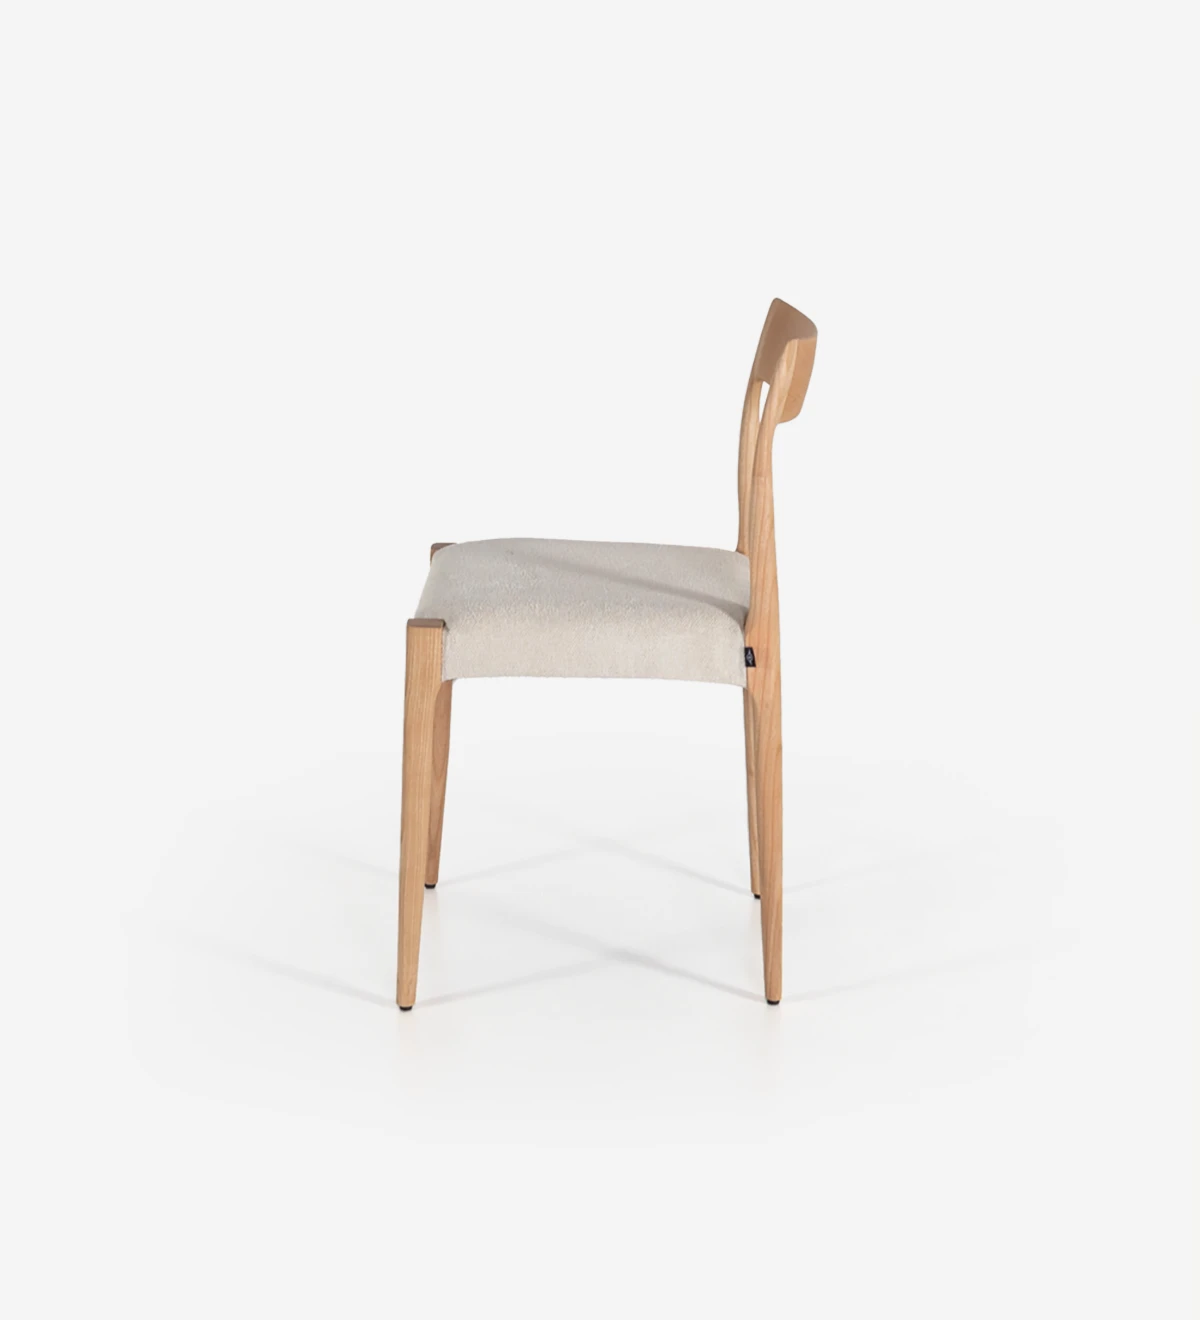 Chair in natural ash wood with fabric upholstered seat.